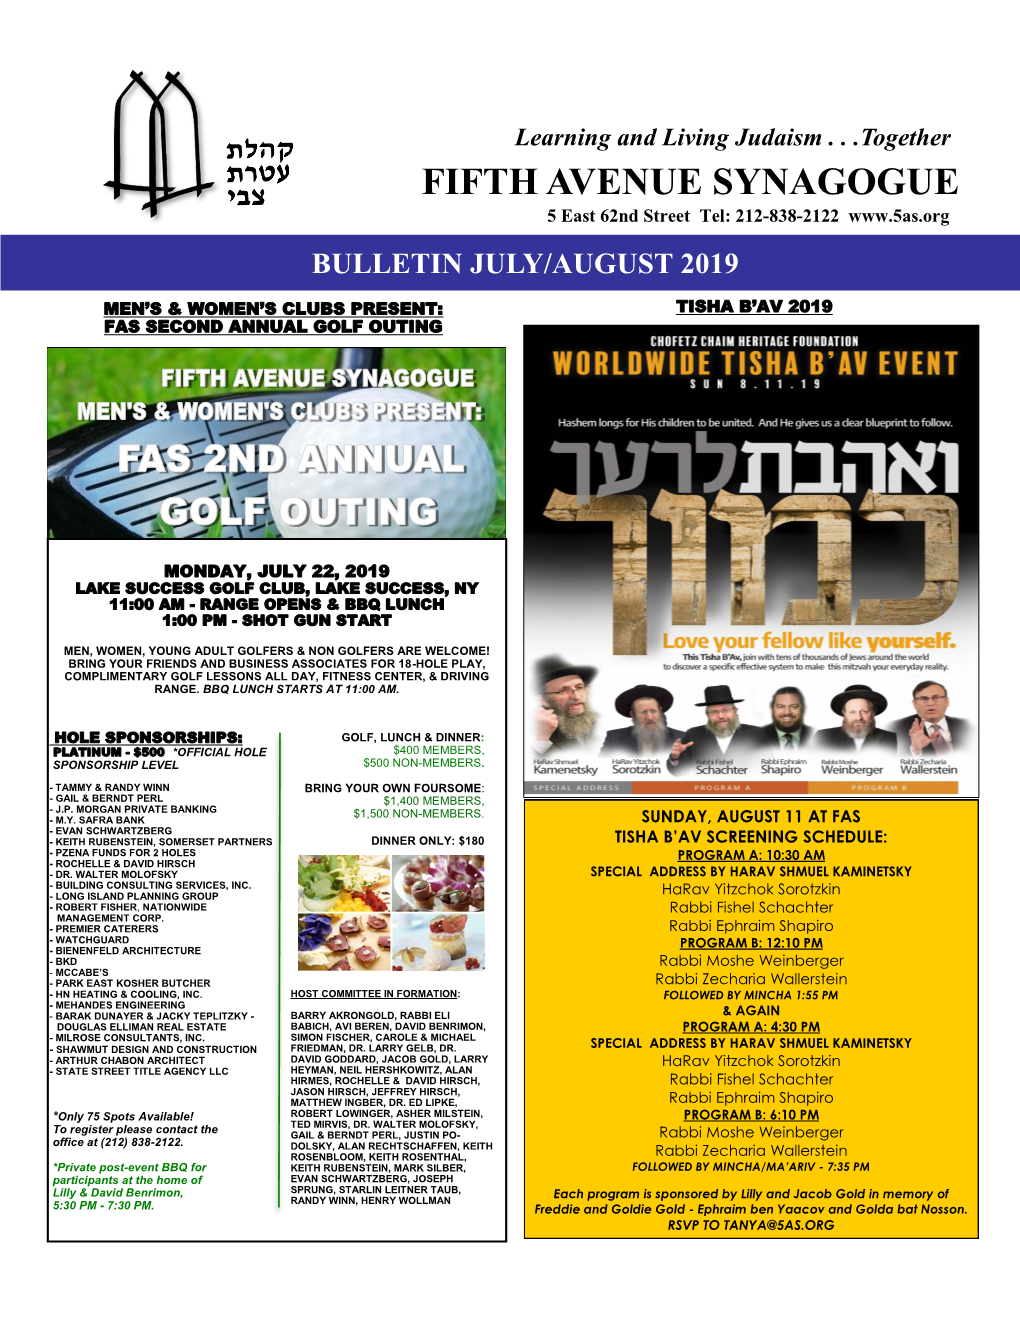 FIFTH AVENUE SYNAGOGUE 5 East 62Nd Street Tel: 212-838-2122